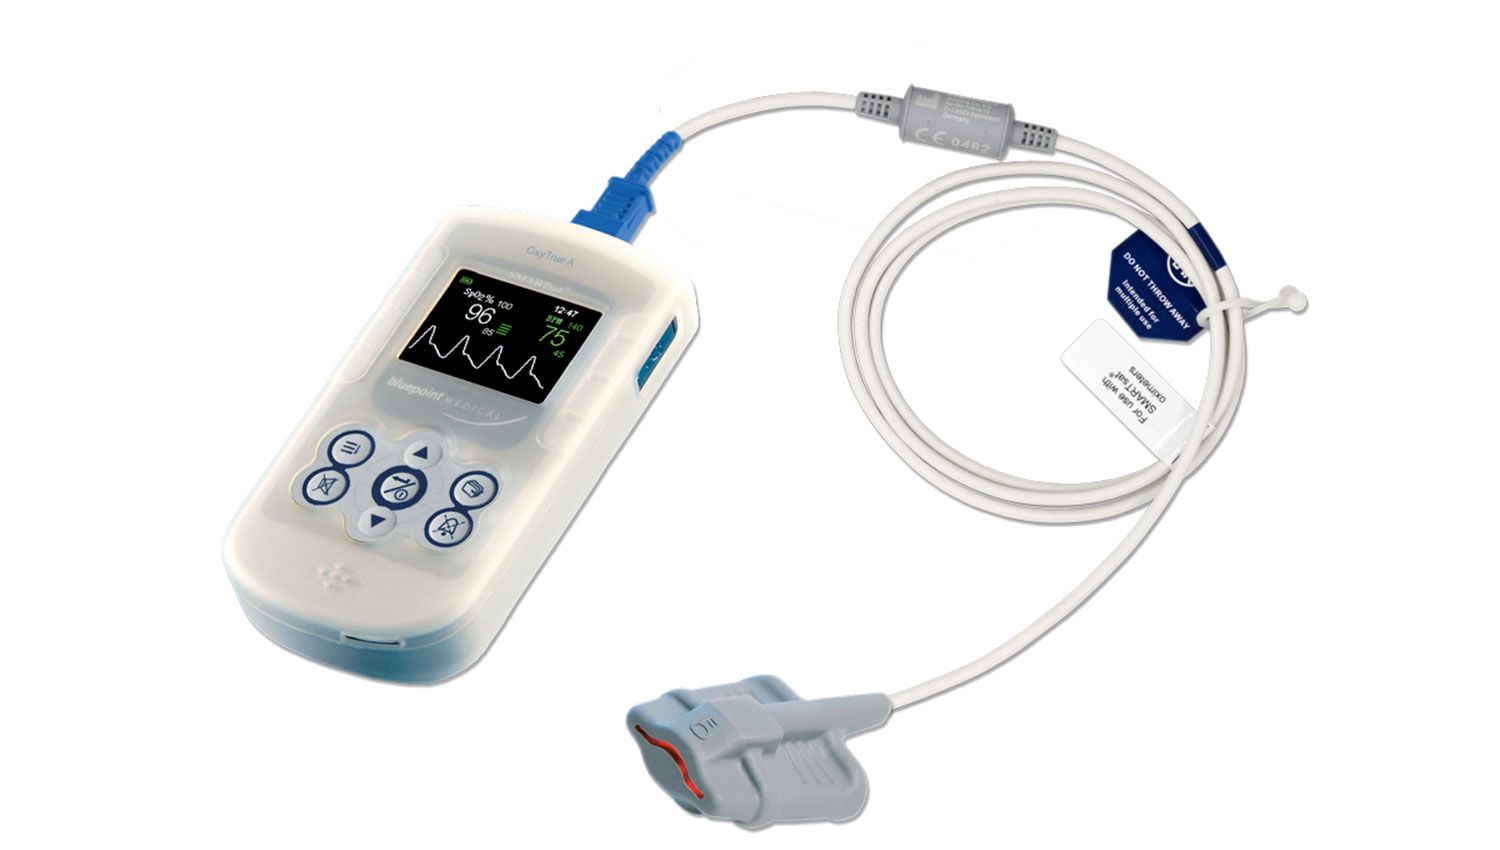 The unique Sapphire® technology ensures accurate measurements and coupled with SoftCap® sensor it delivers improved patient comfort.